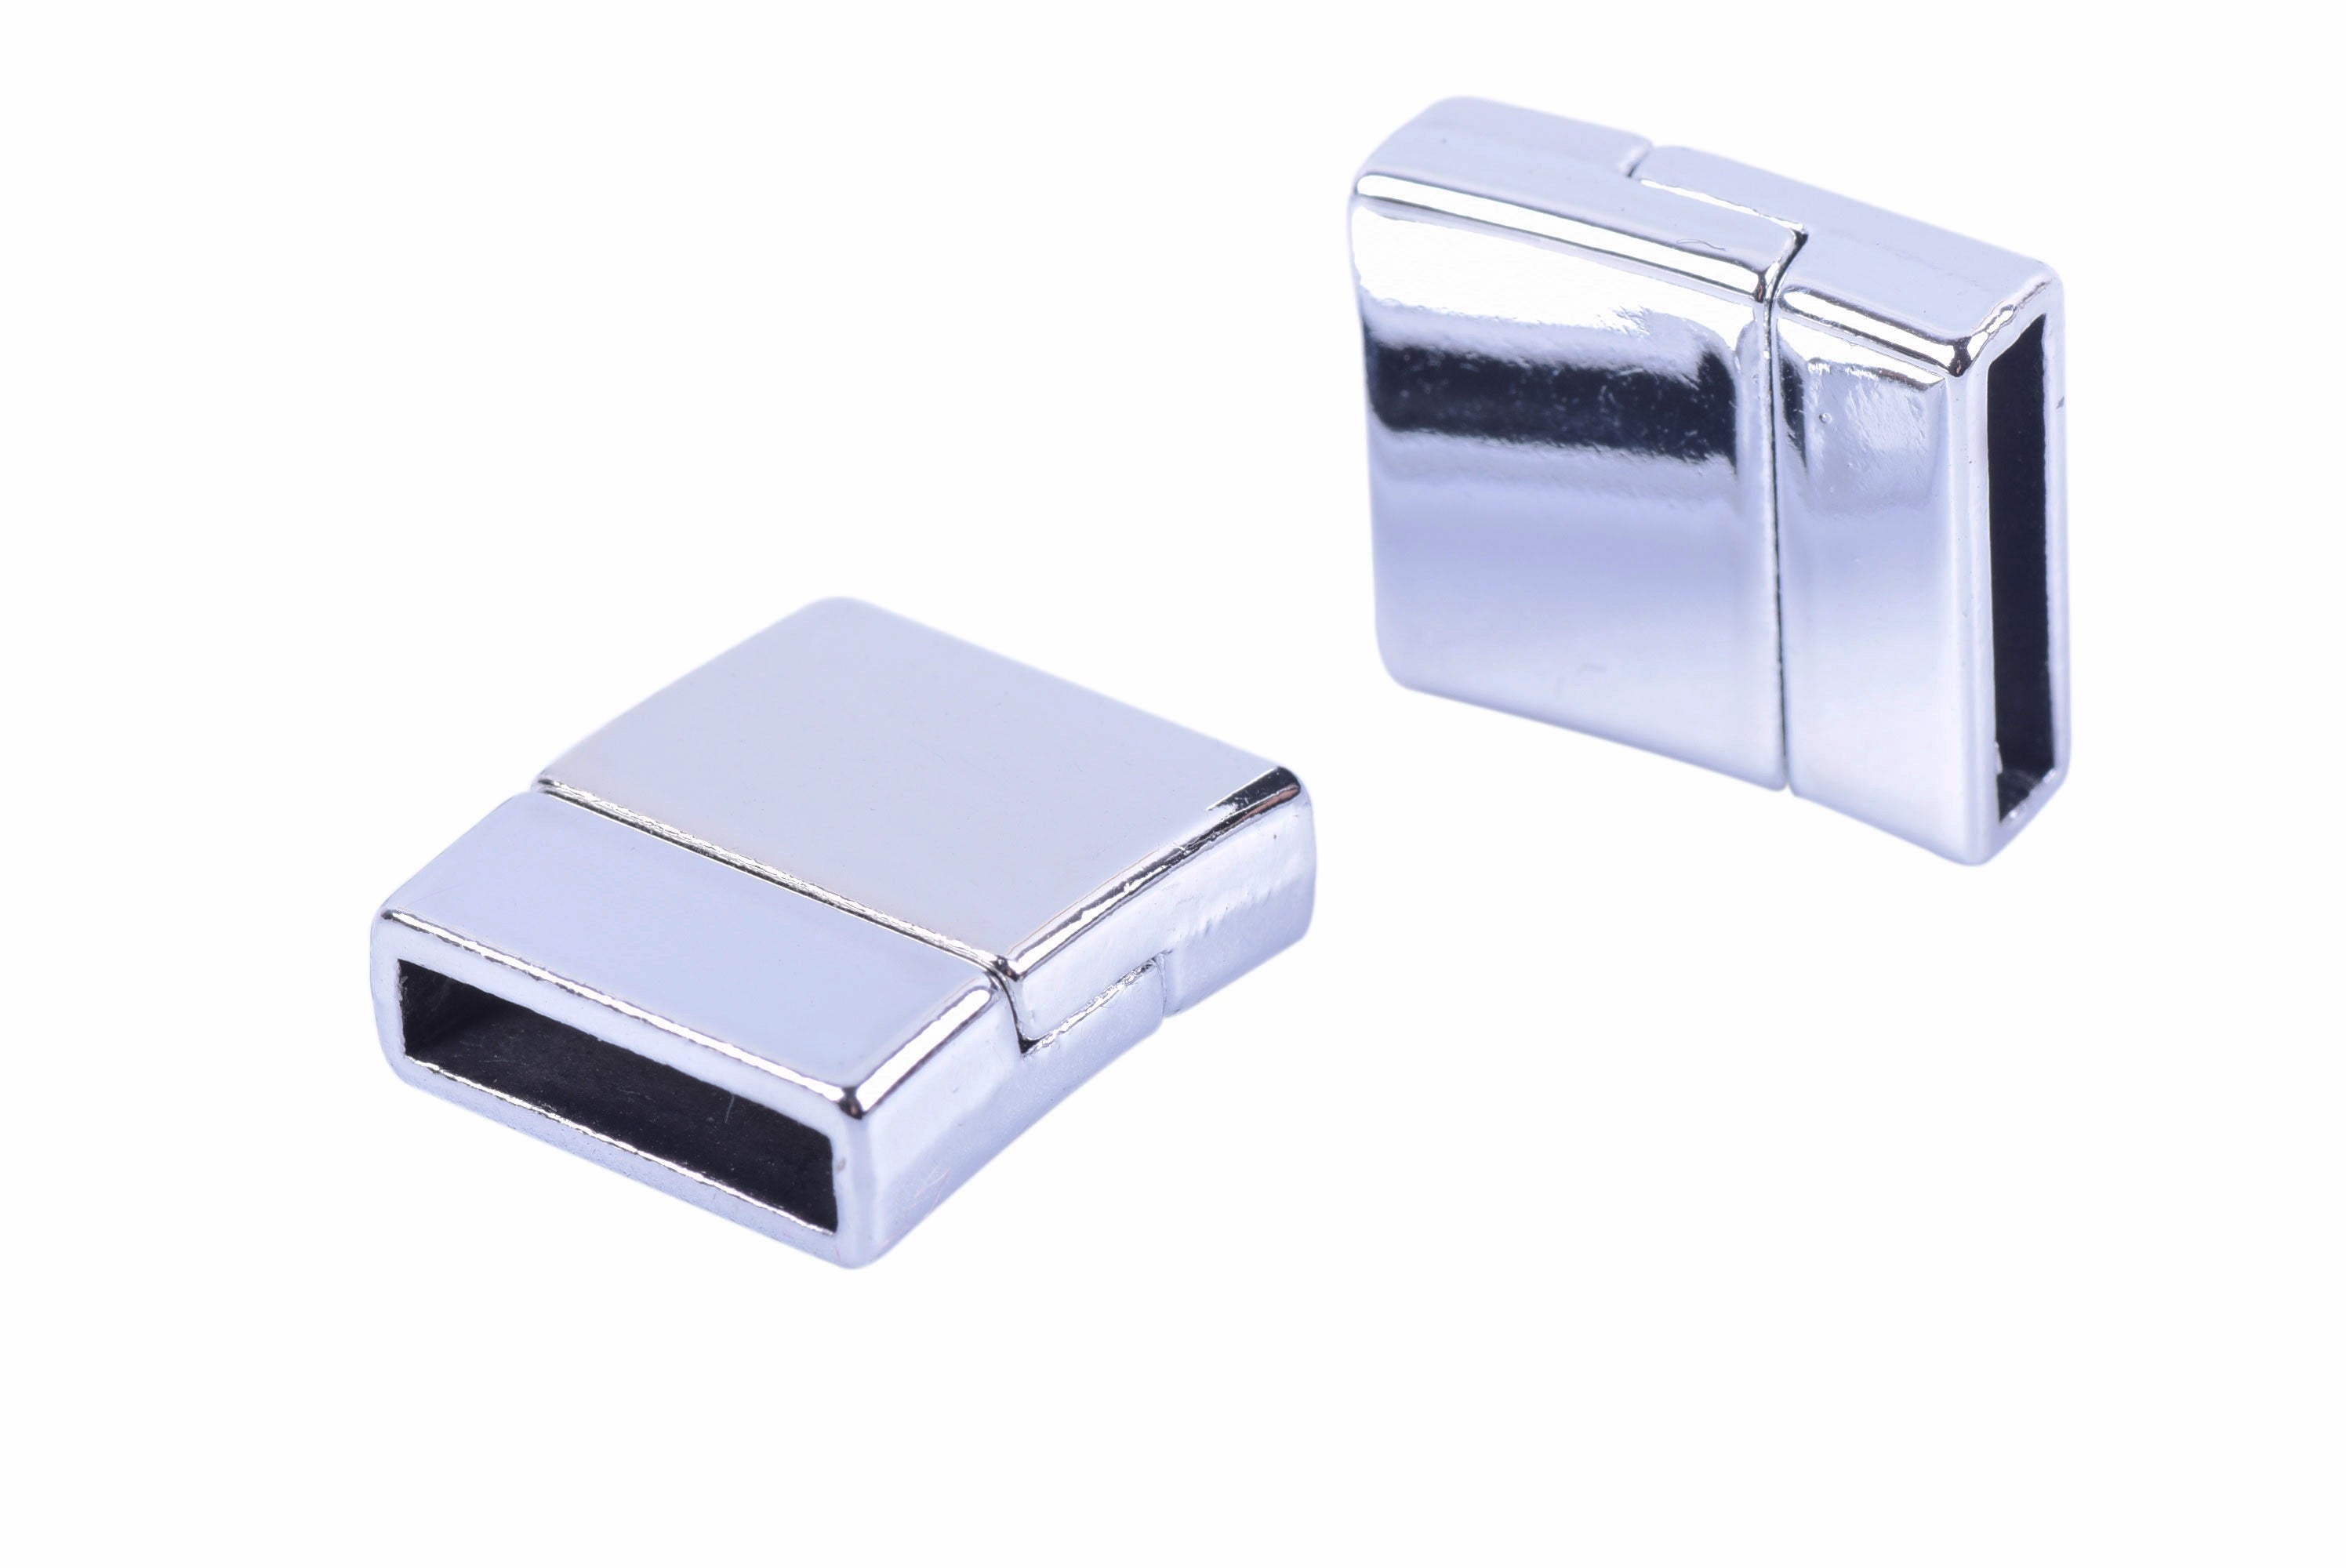 Magnetic Clasp, Stainless Steel 8mm